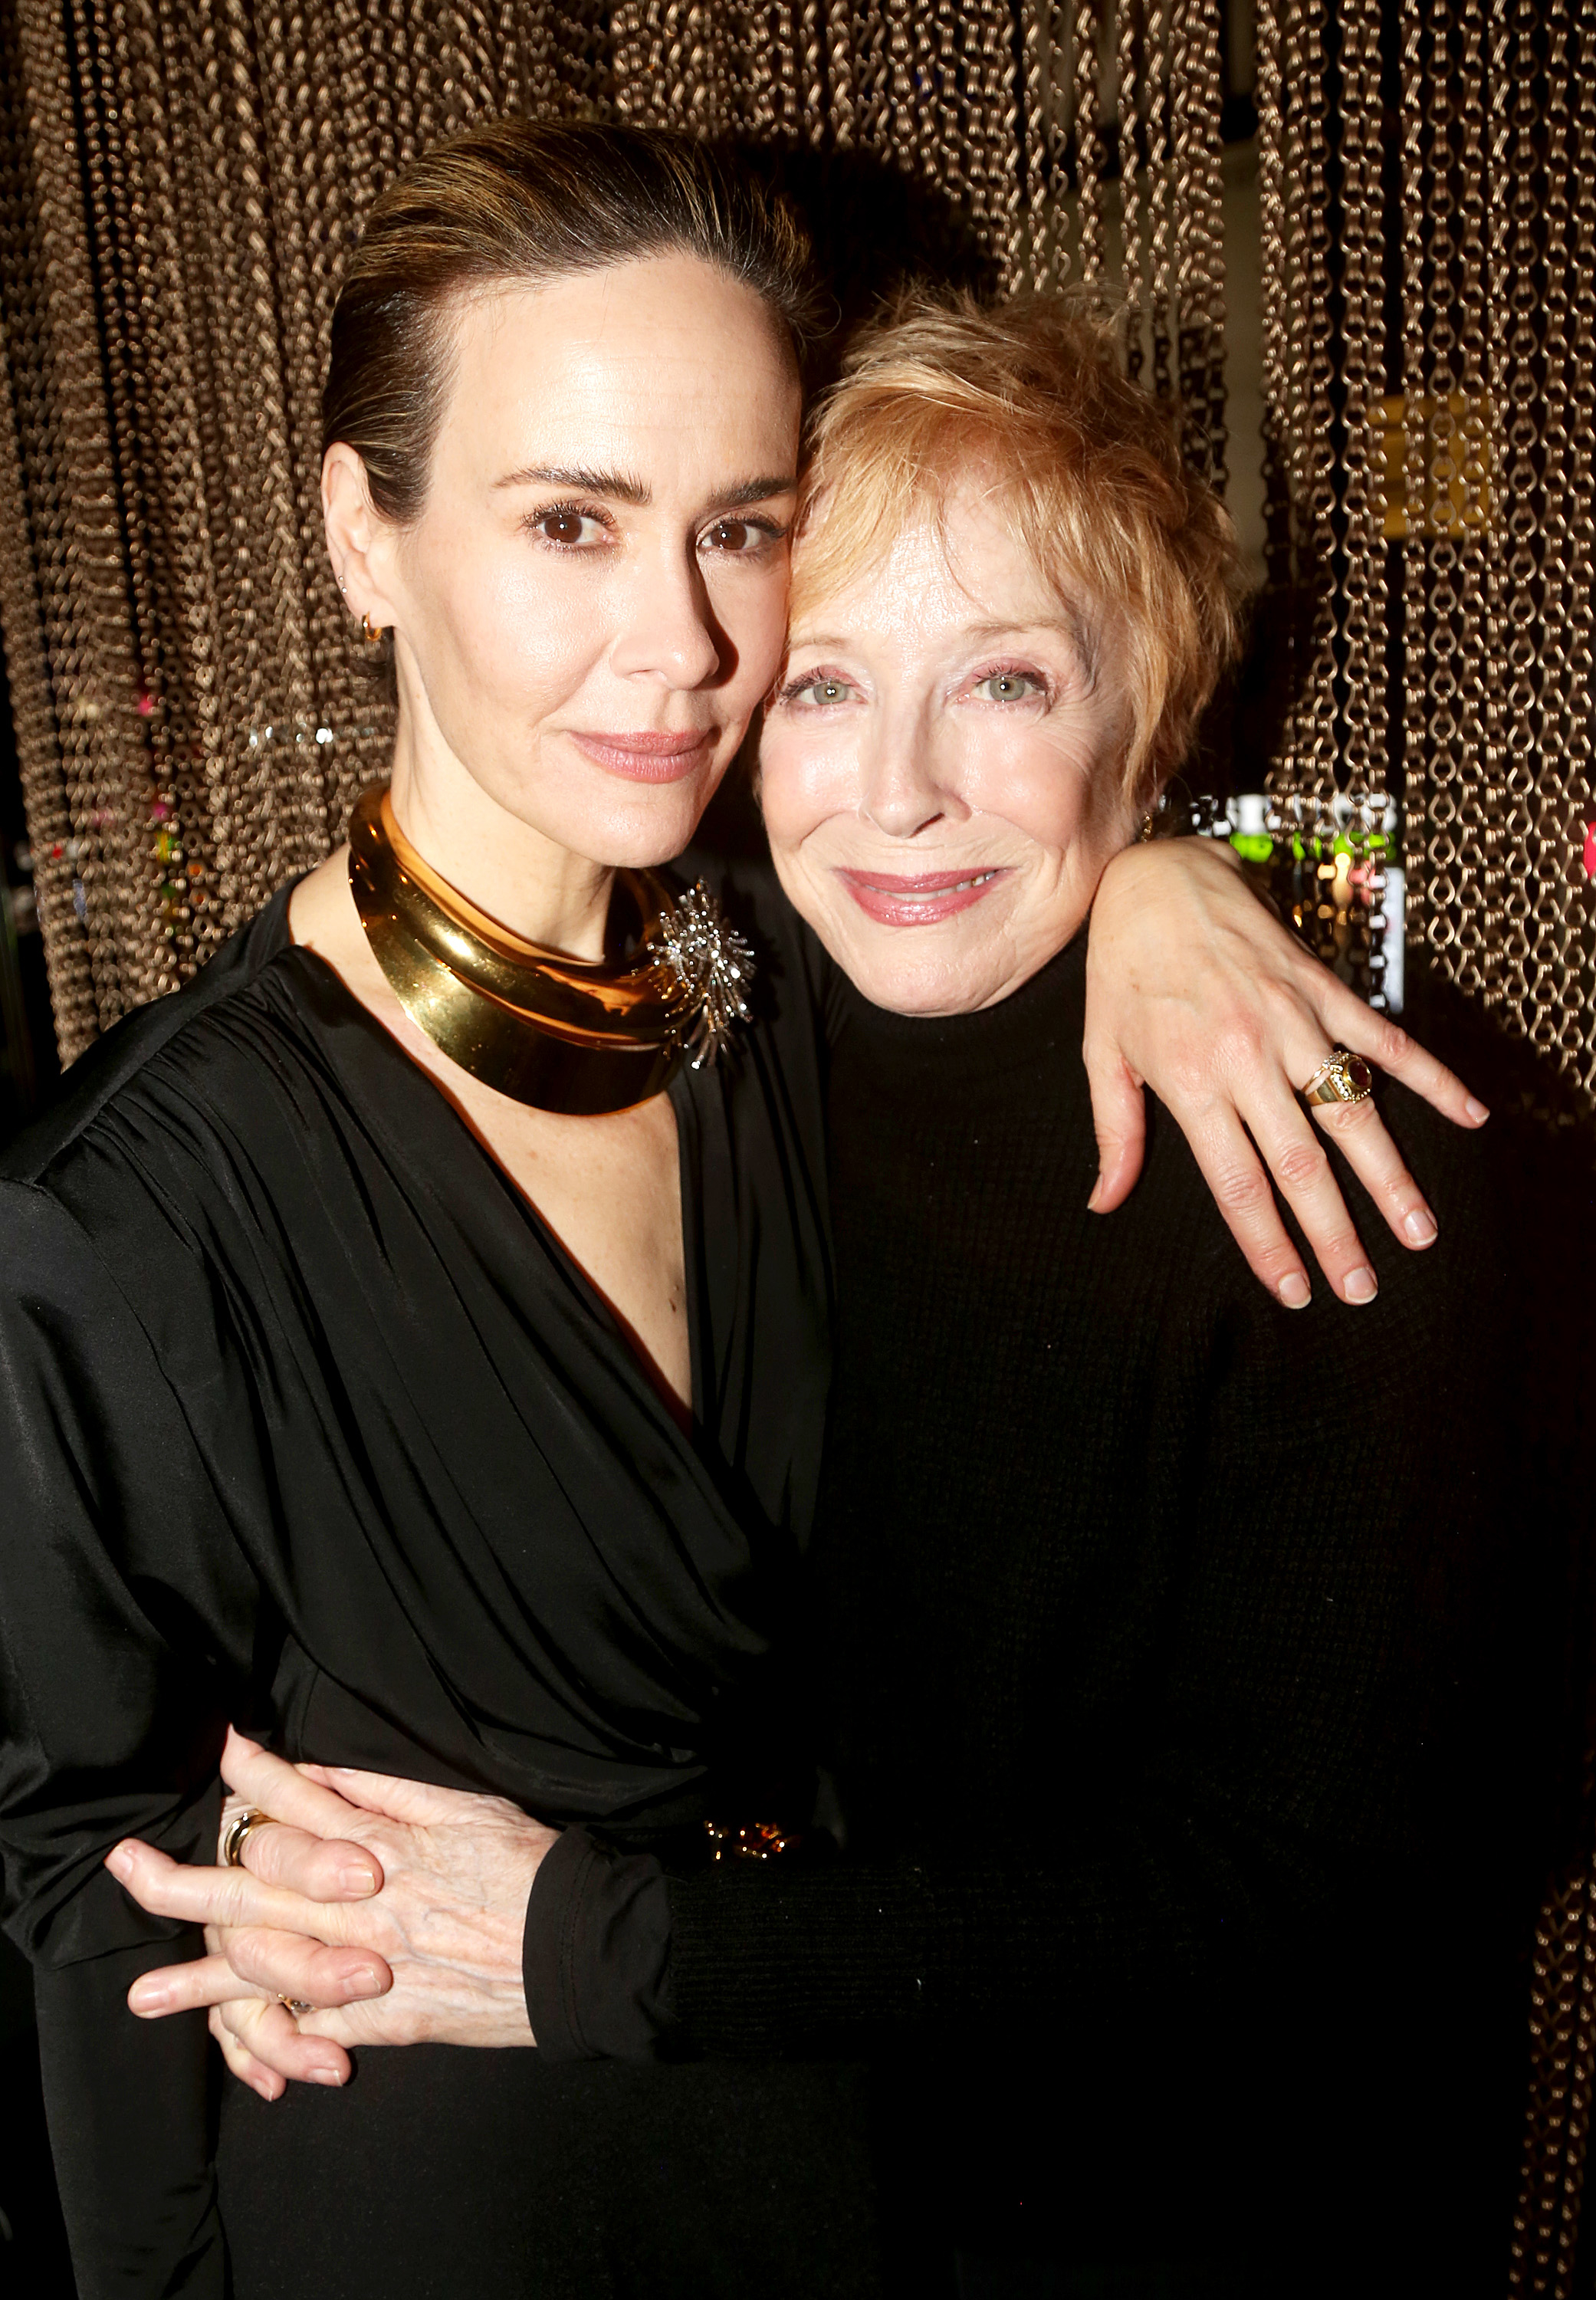 Two women embracing, one in a black turtleneck, the other in a draped blouse with a statement necklace